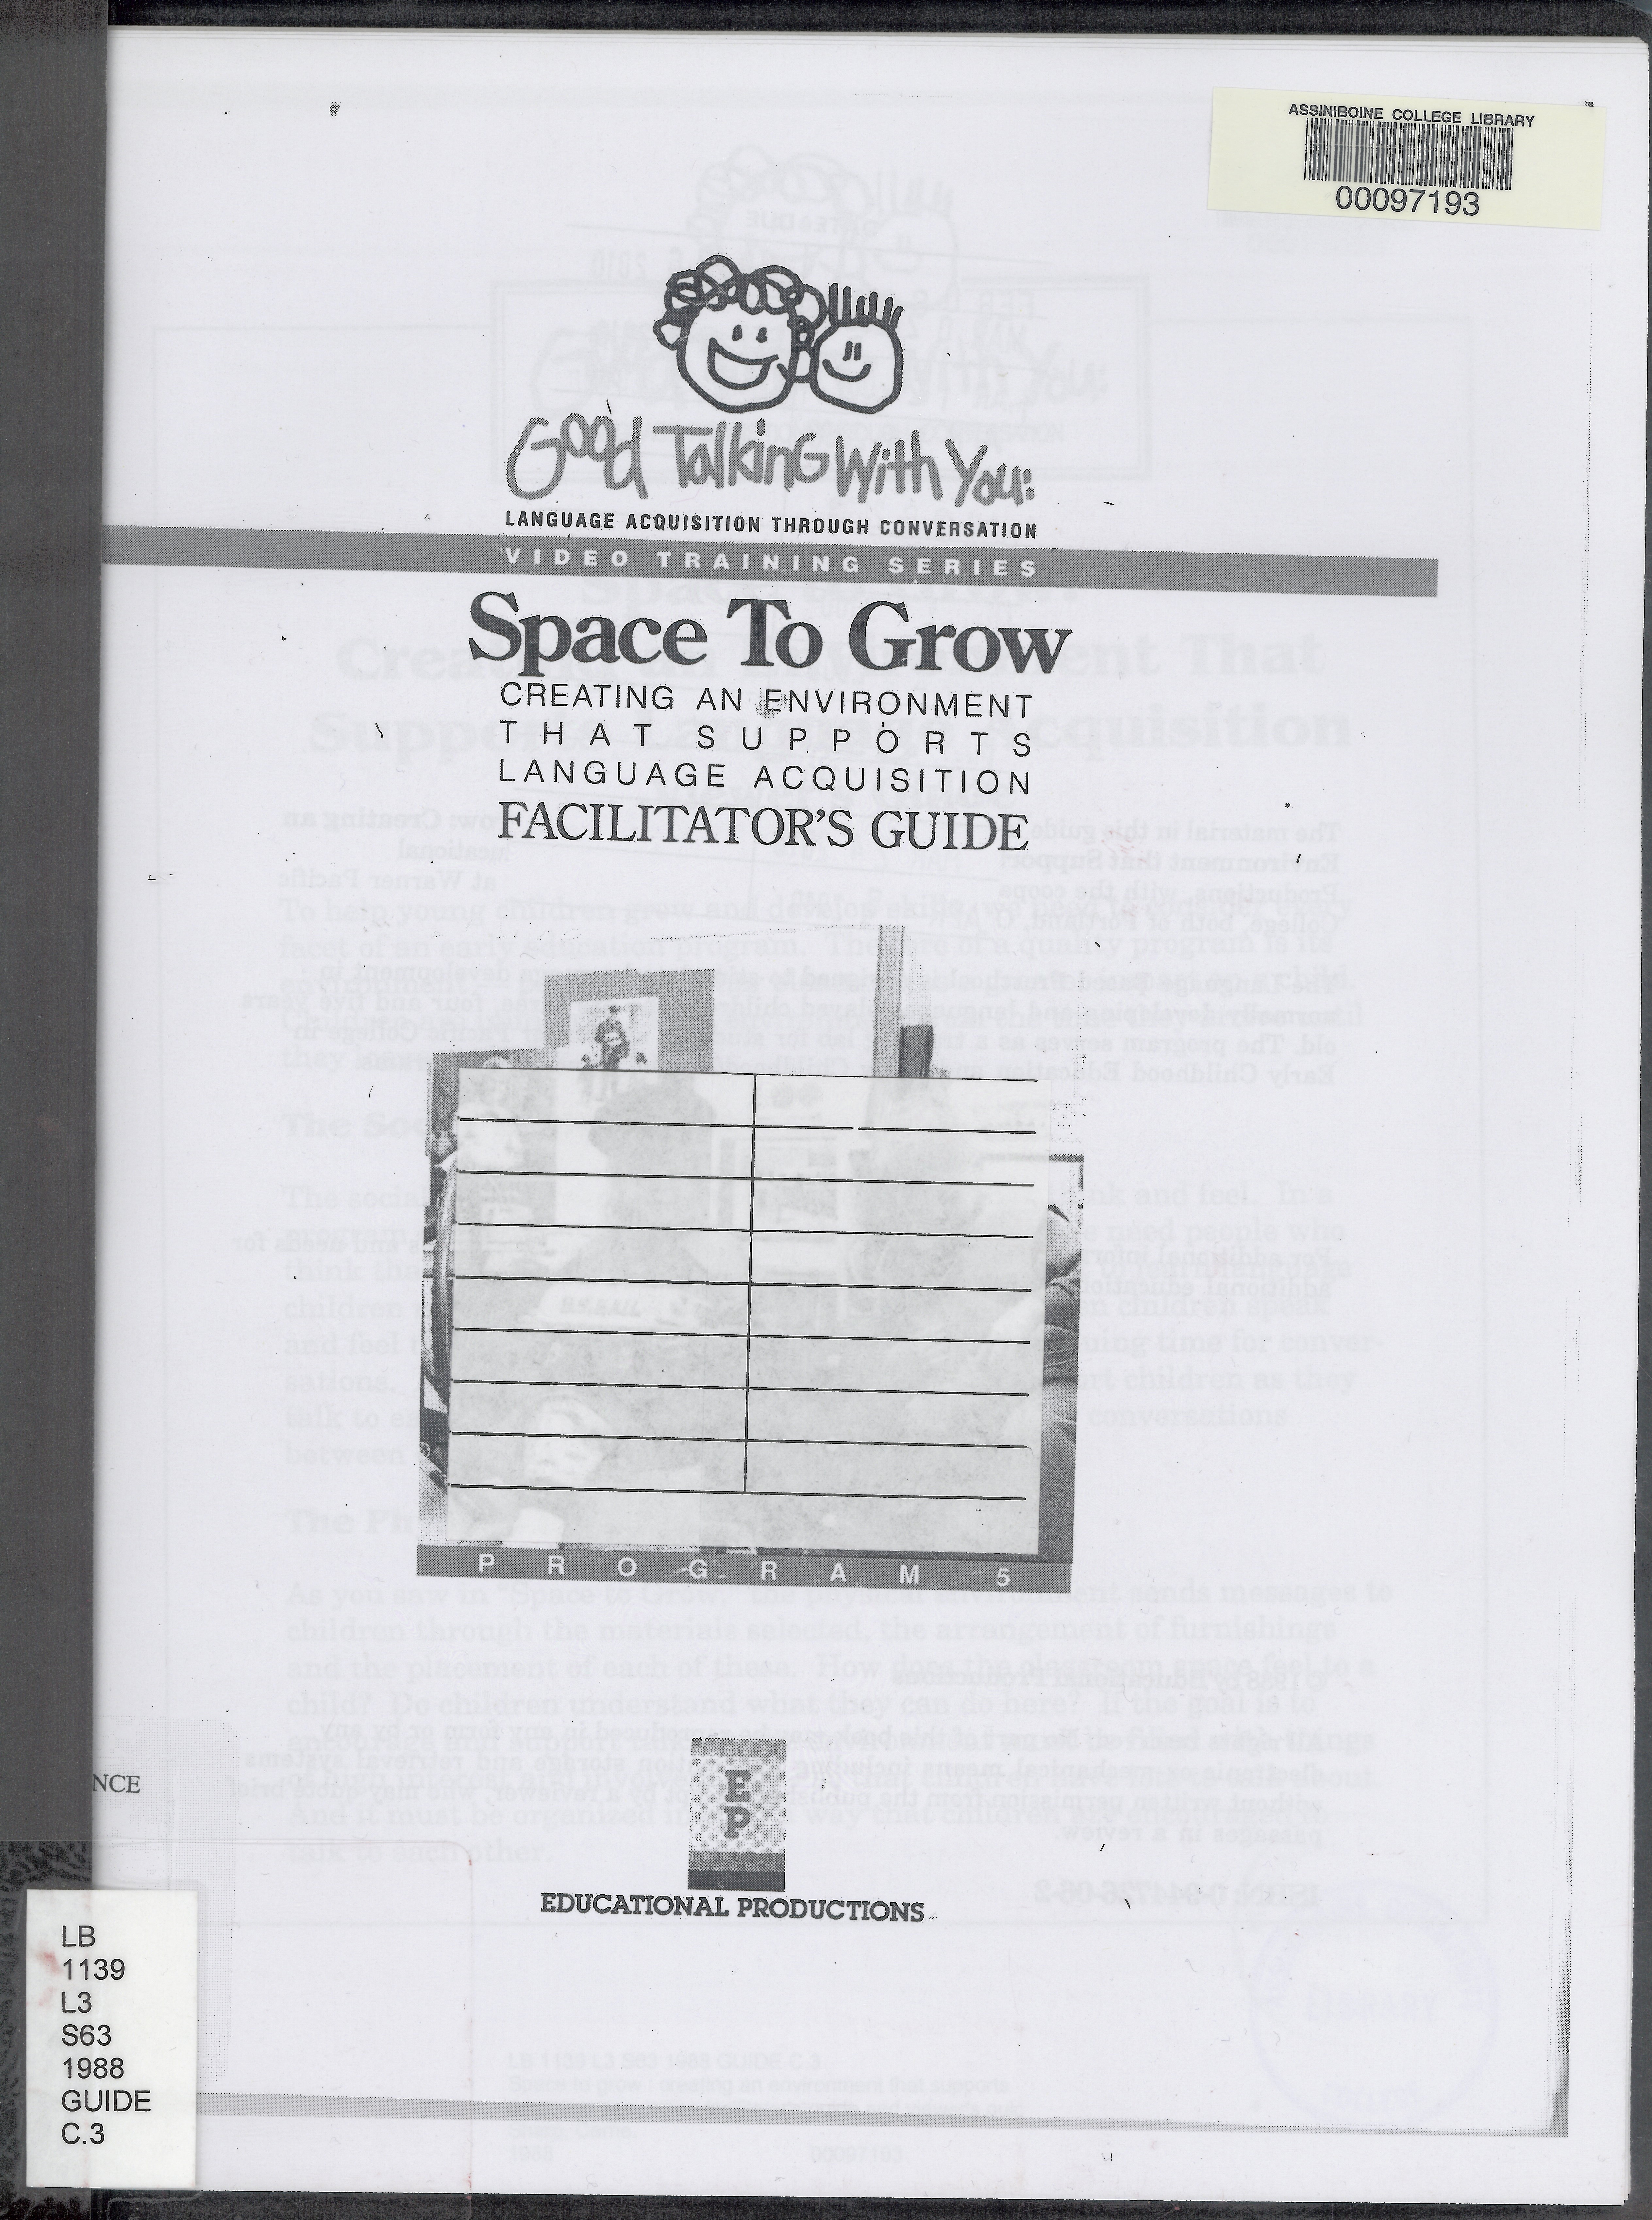 Space to grow : creating an environment that supports language acquisition.